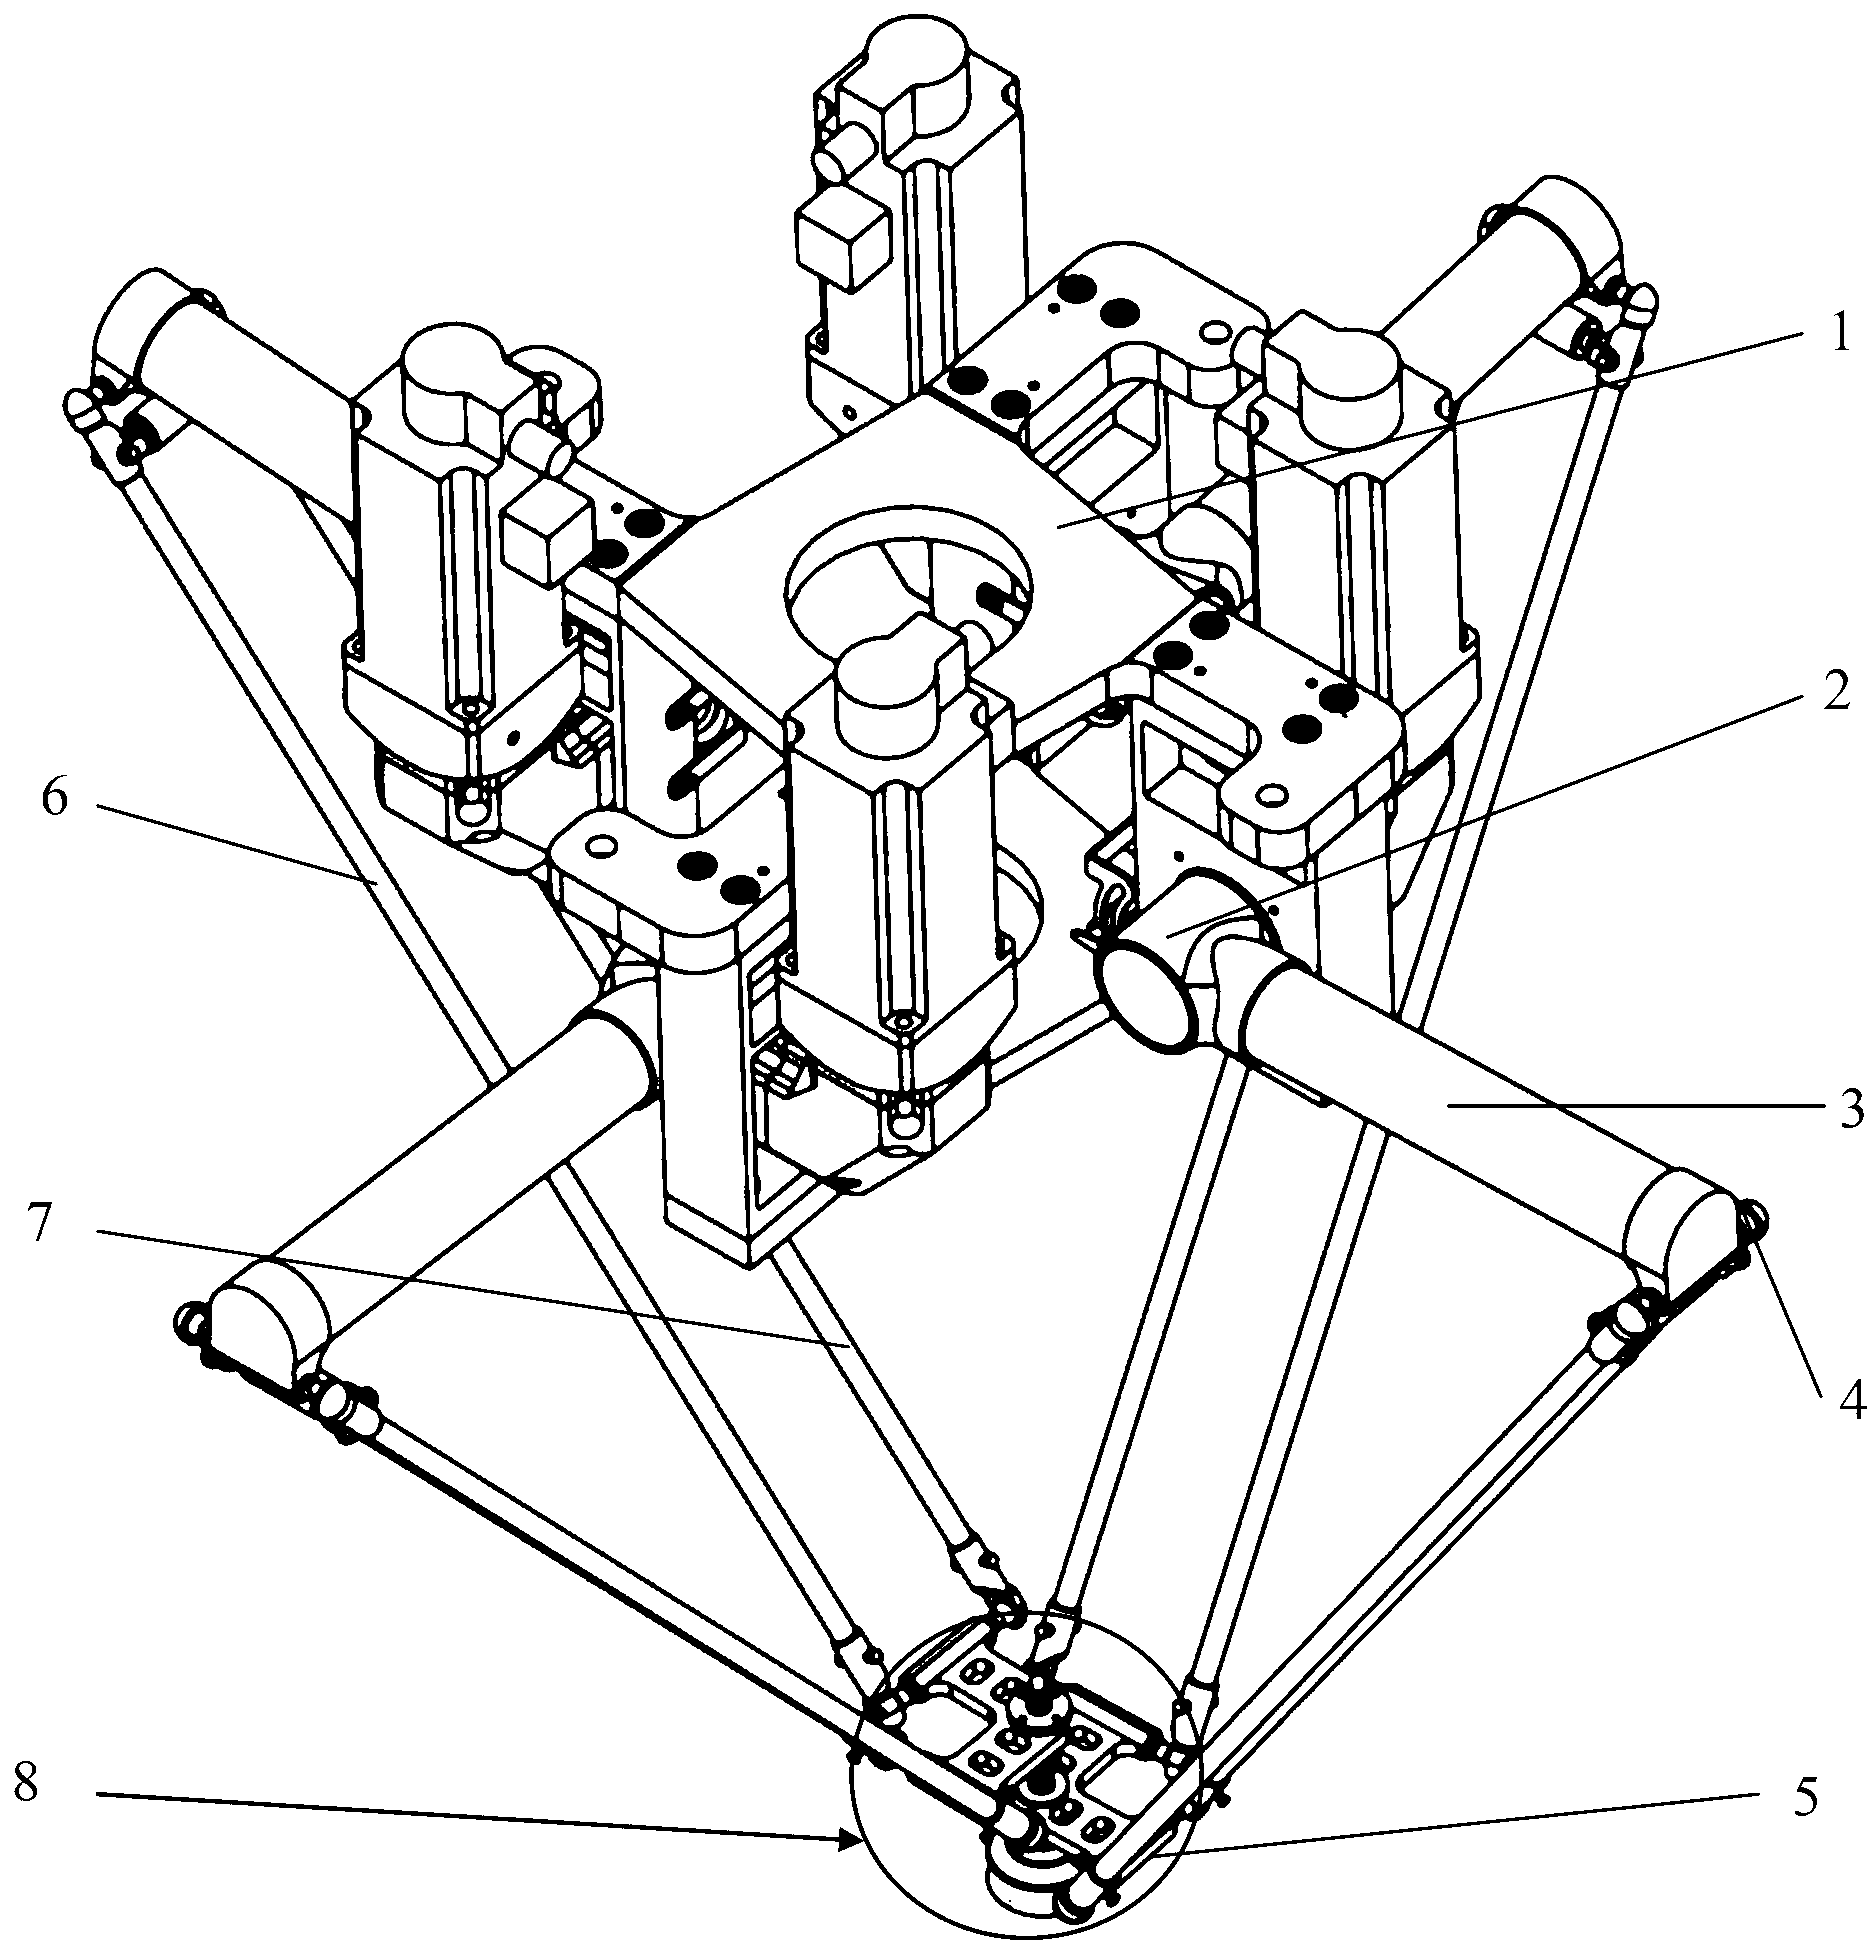 Parallel mechanism with three-dimensional translation and one-dimensional rotation functions